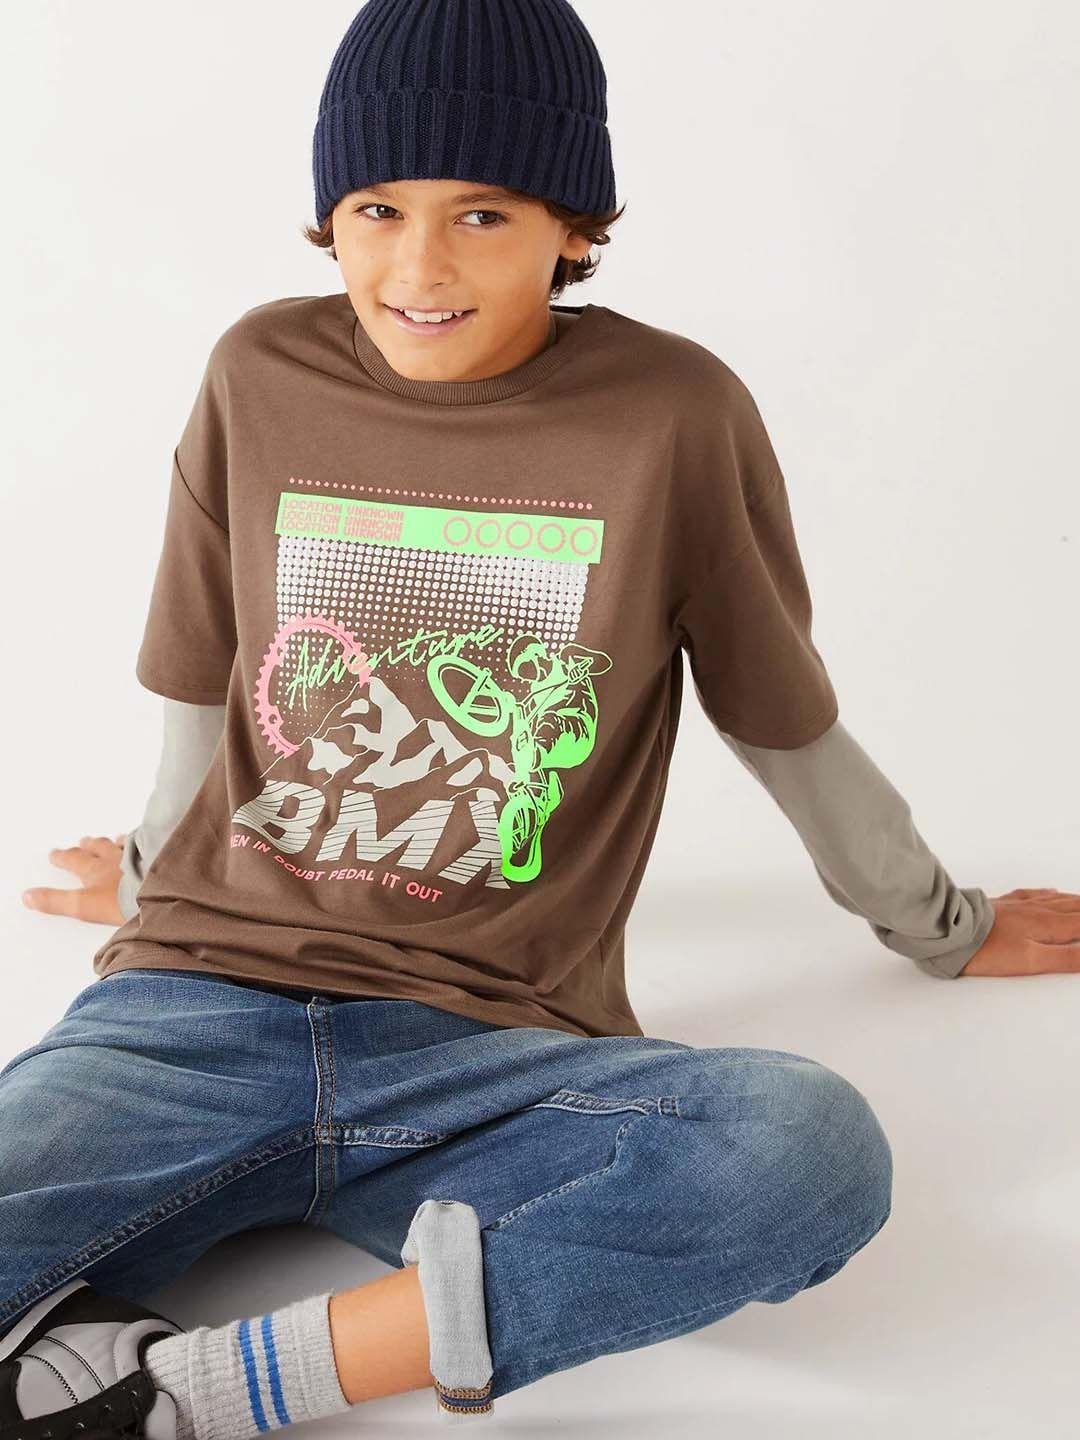 marks-&-spencer-boys-graphic-printed-cotton-t-shirt